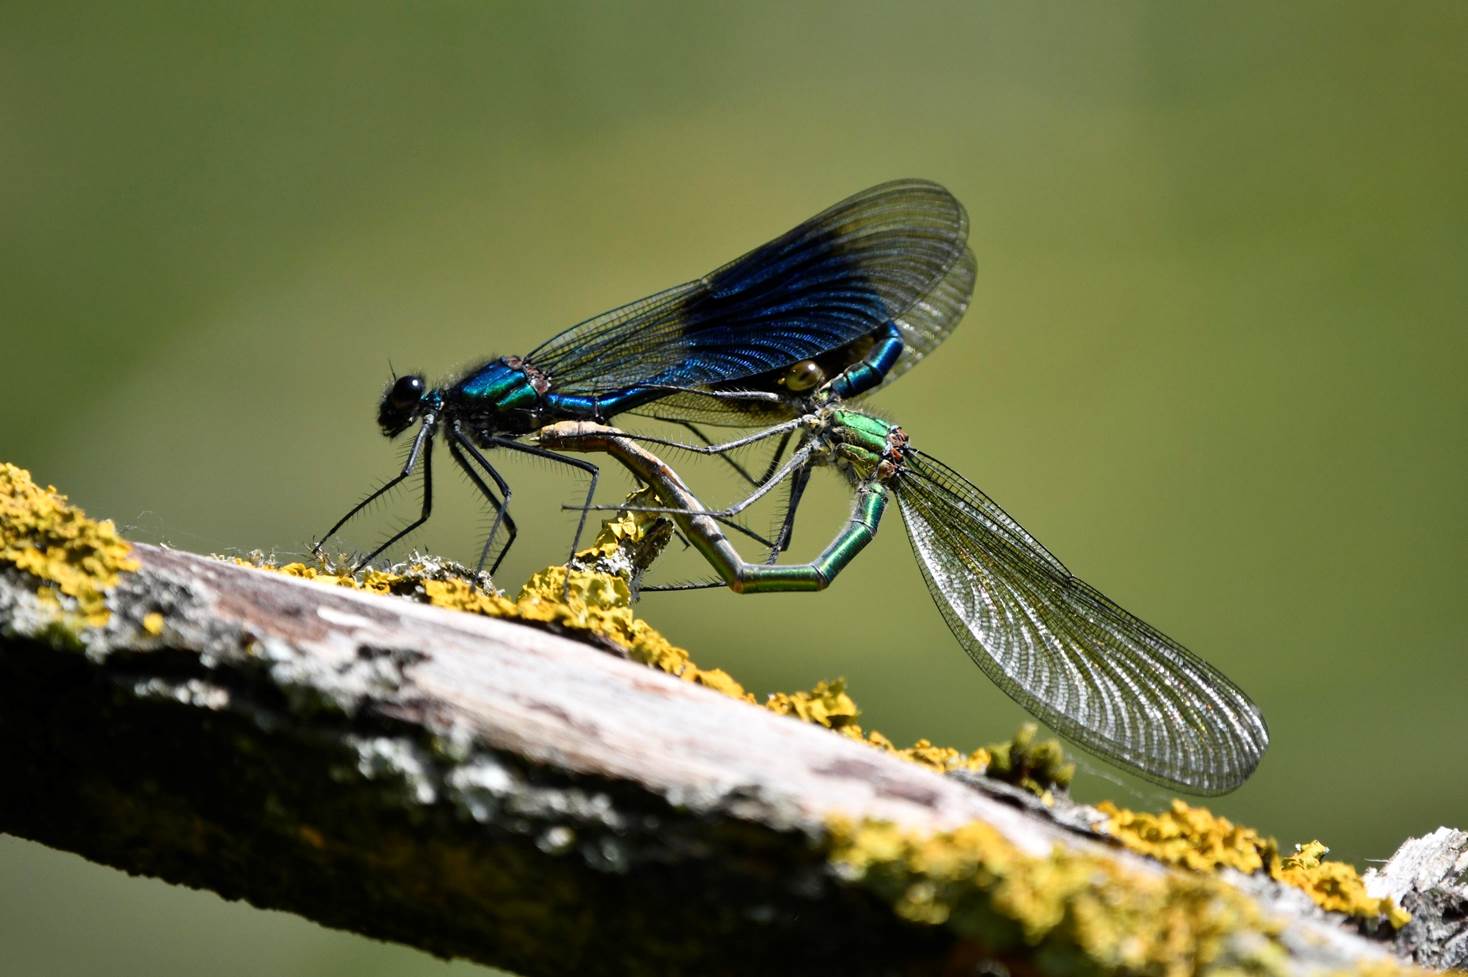 A pair of dragonflies on a branch

Description automatically generated